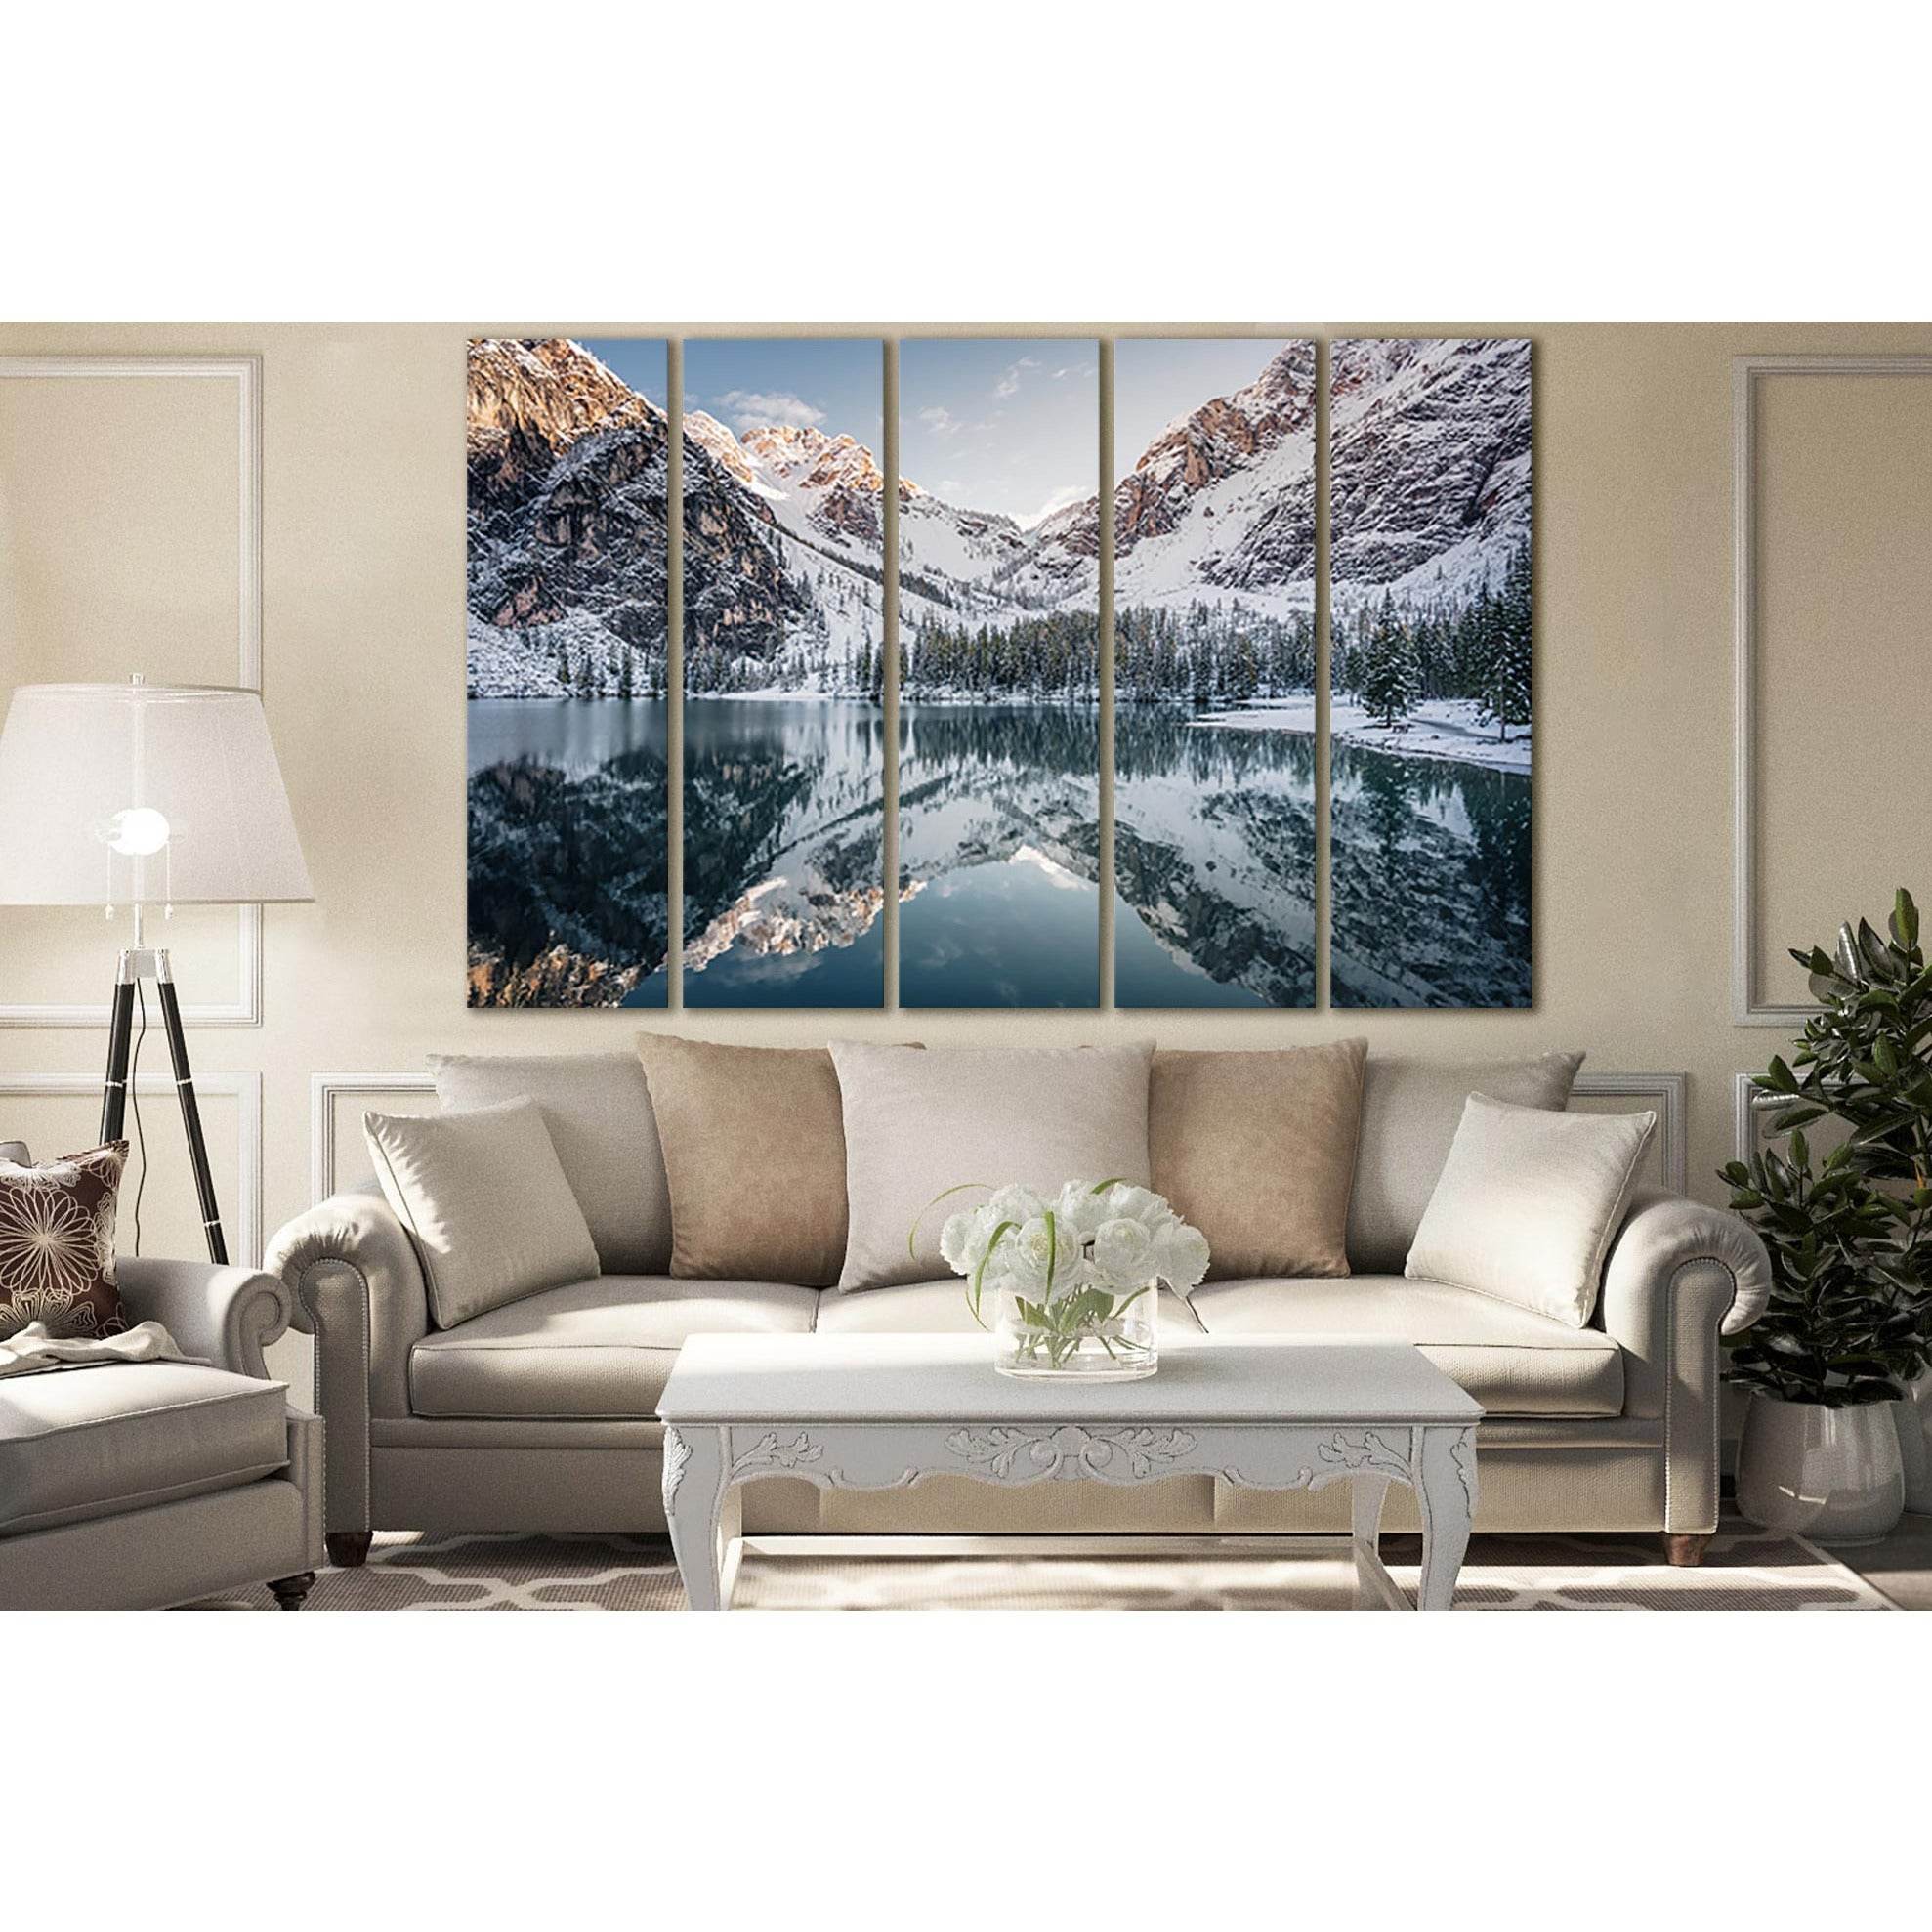 Reflection Of Winter Mountains In The Lake №SL1589 Ready to Hang Canvas Print